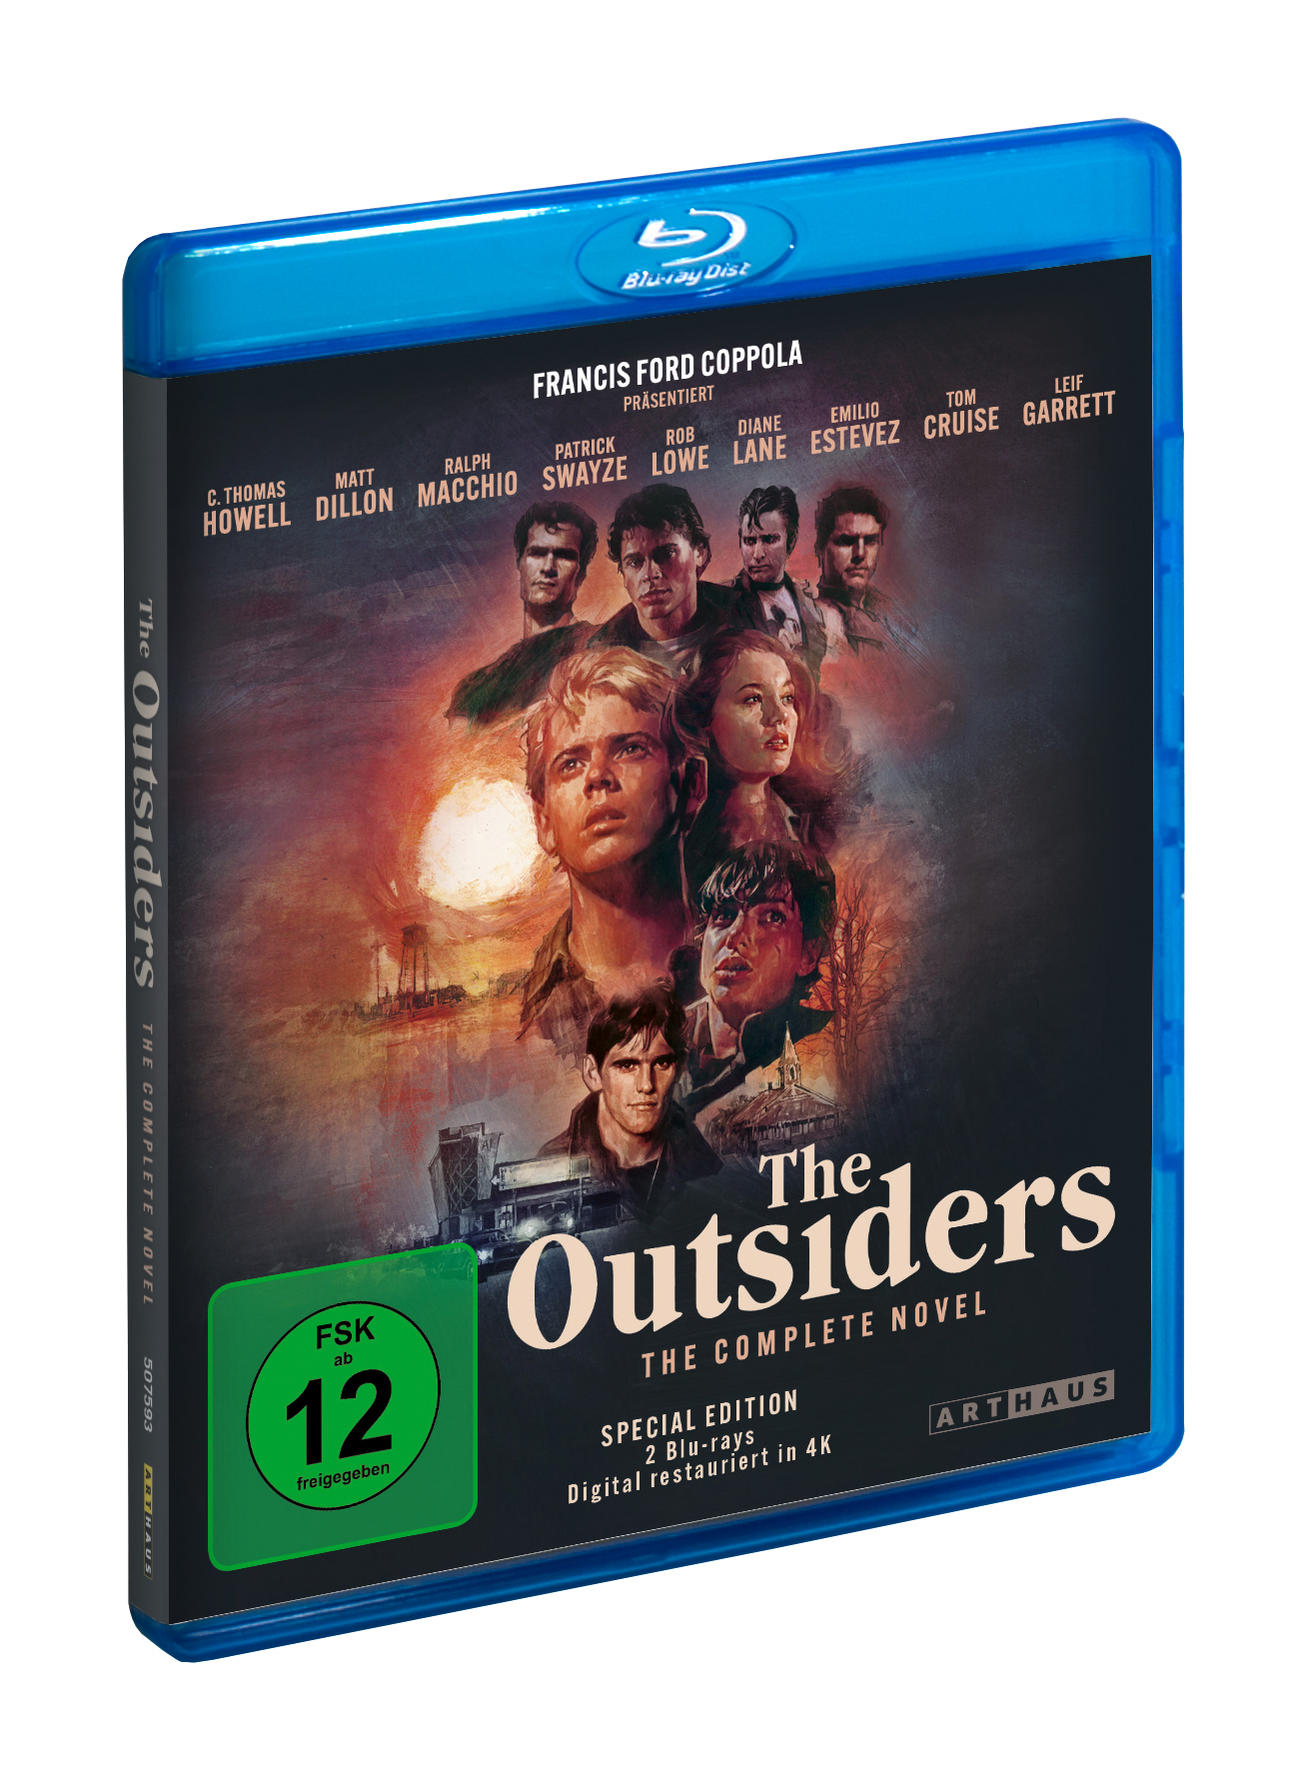 Blu-ray Outsiders The